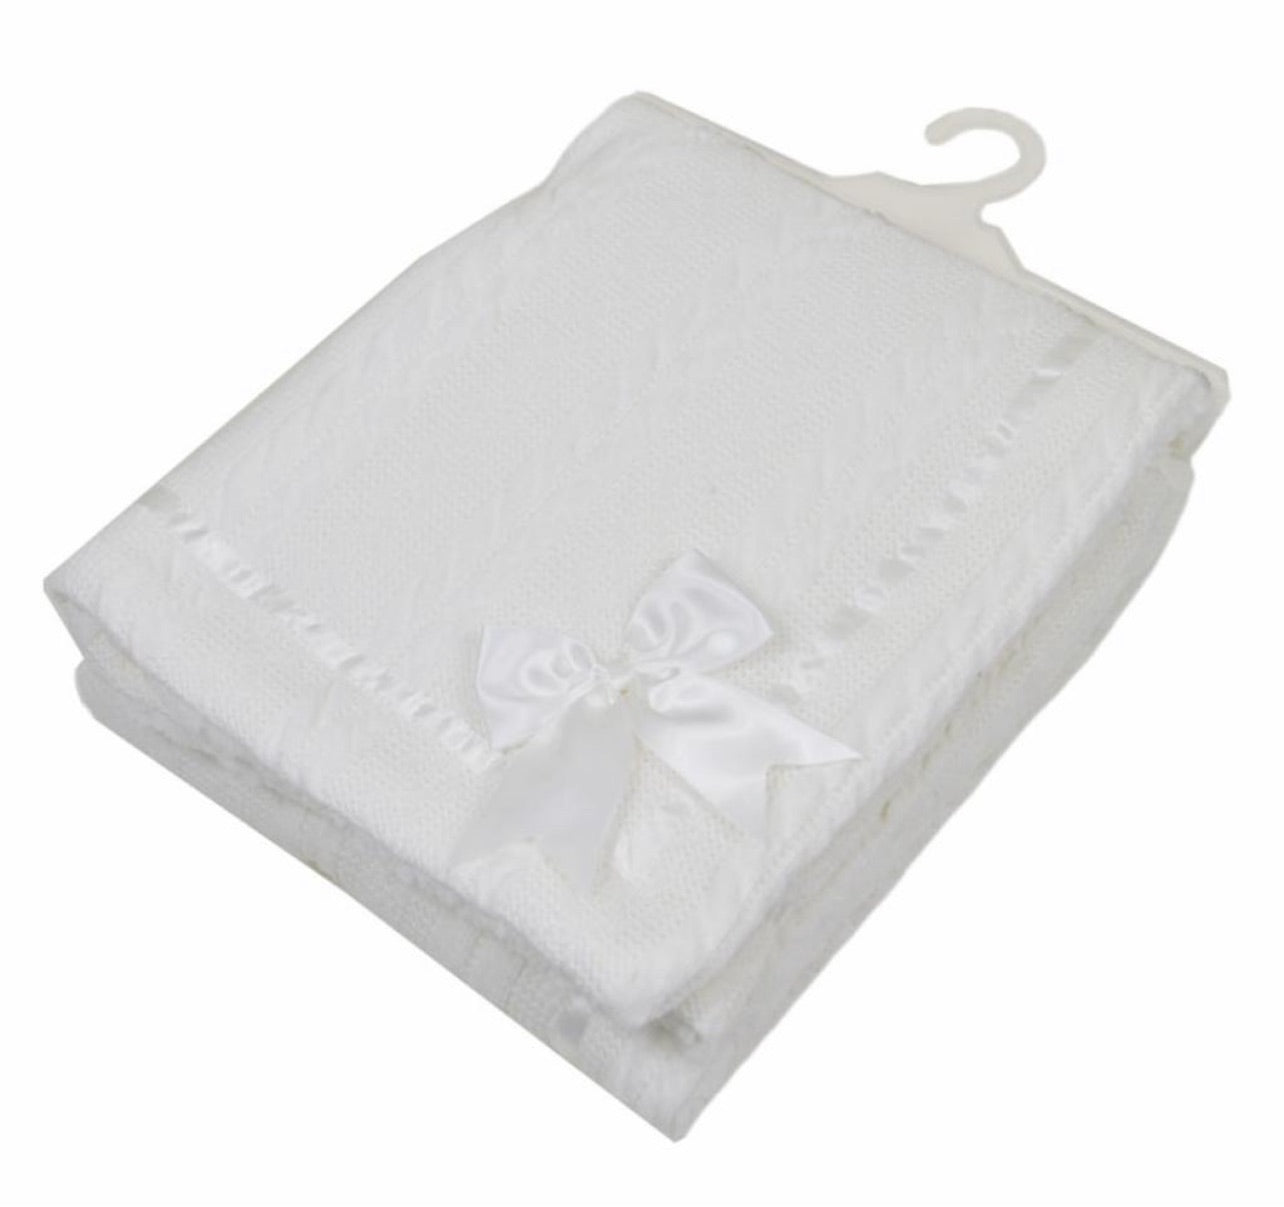 Cable knit sherpa bow blanket - White